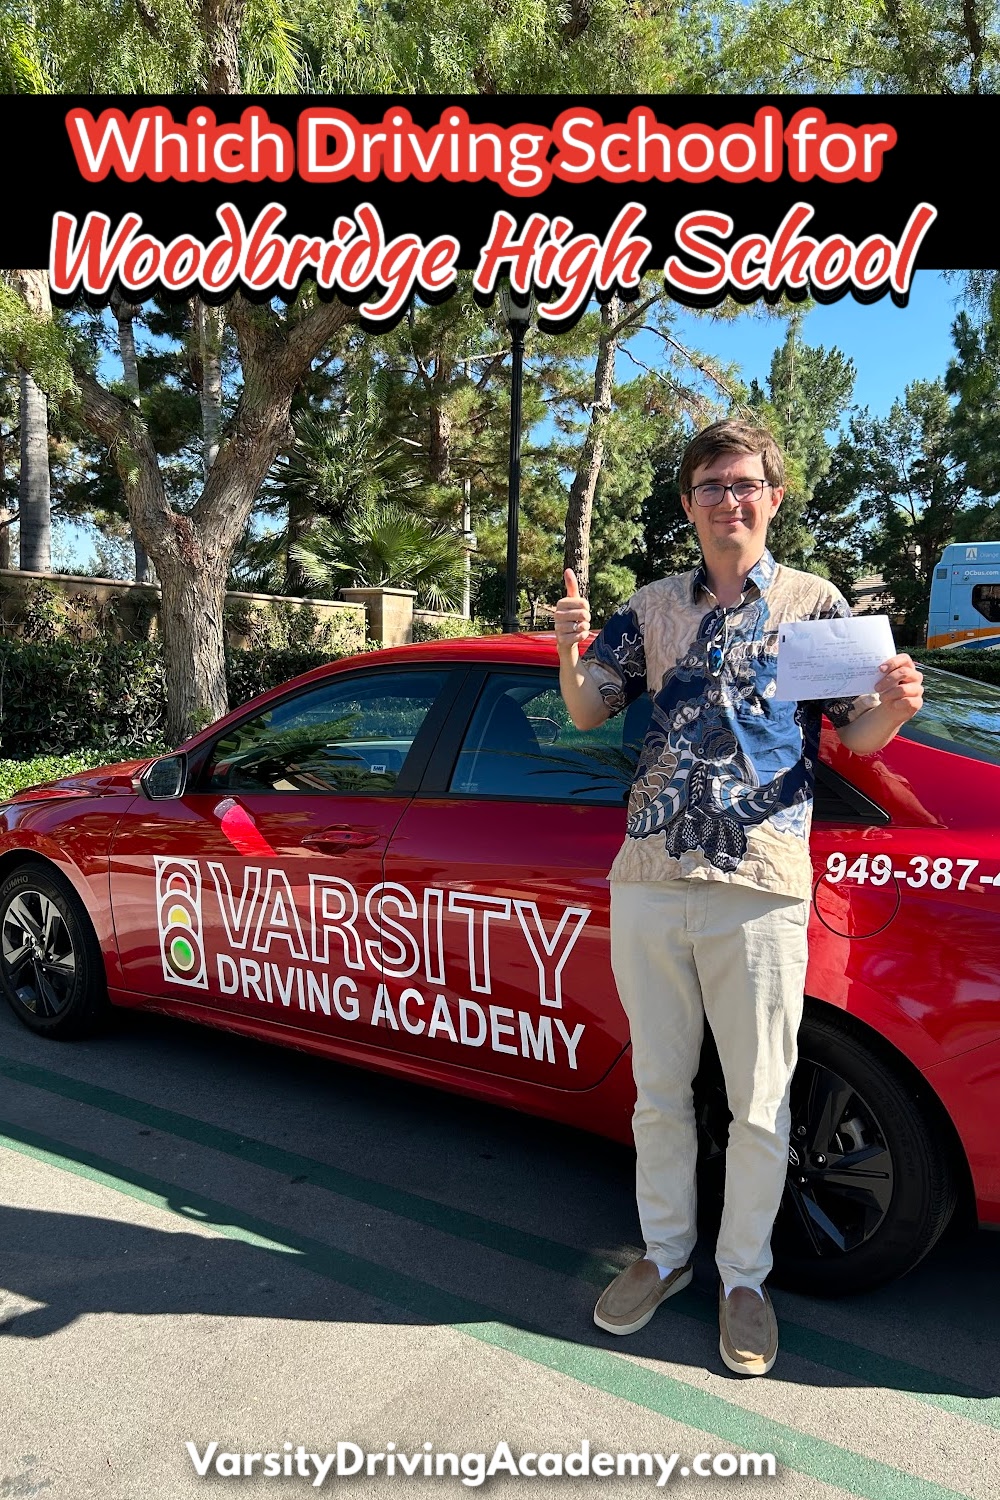 Which driving school for Woodbridge High School Irvine should you attend? Varsity Driving Academy, where success is the goal.